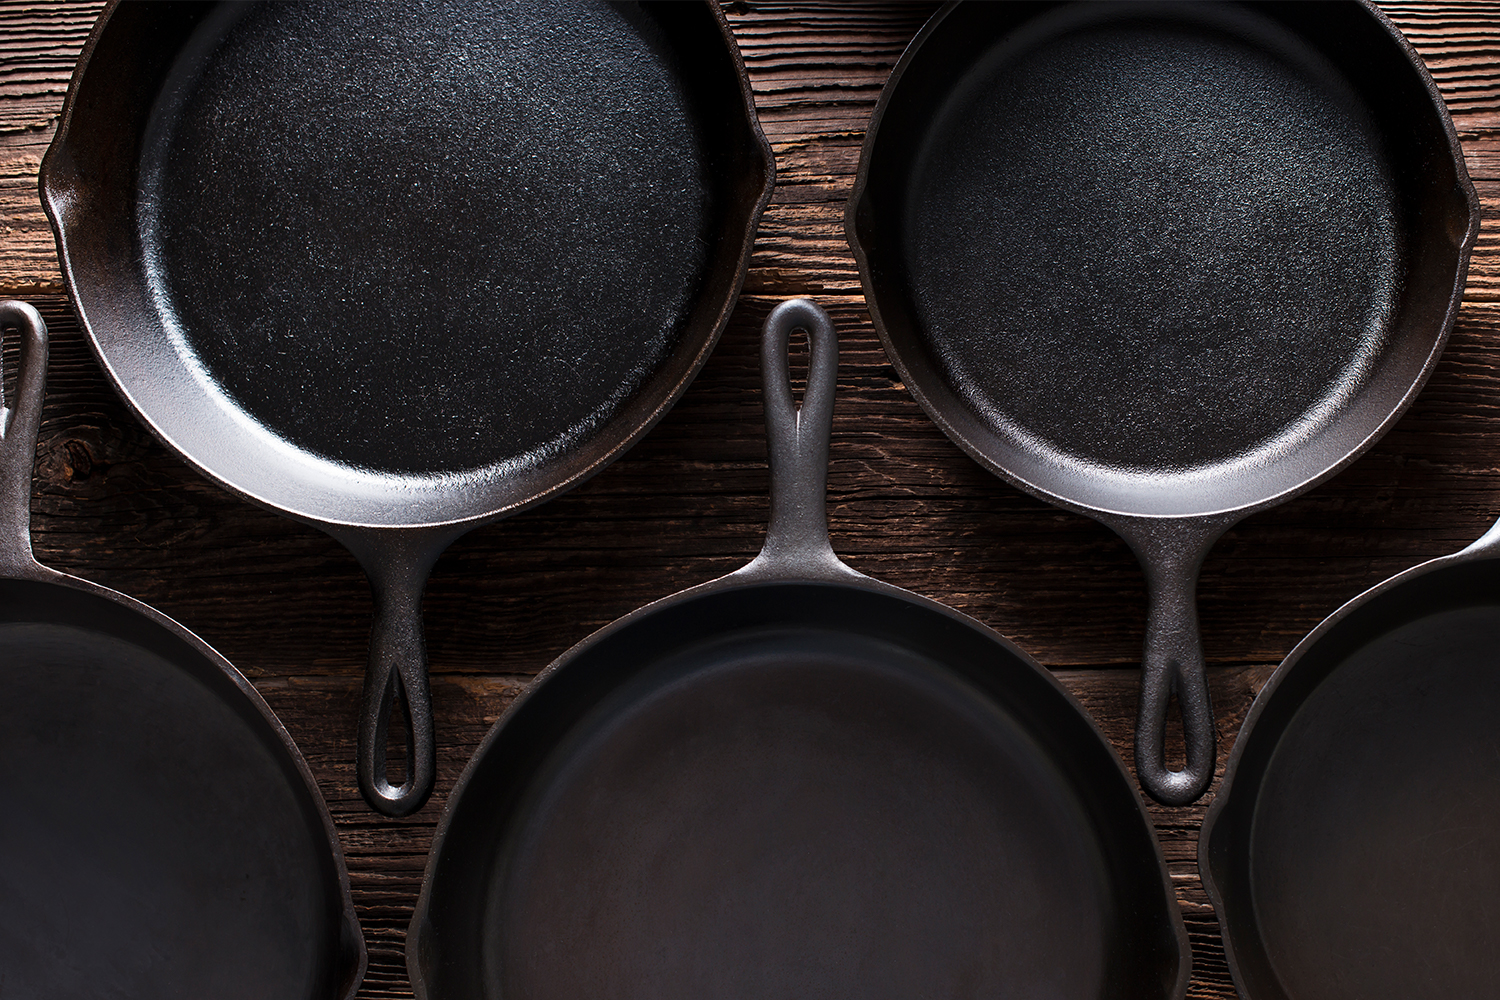 What To Do First with Your Finex Cast Iron Skillet - Seasoning &  Maintenance 